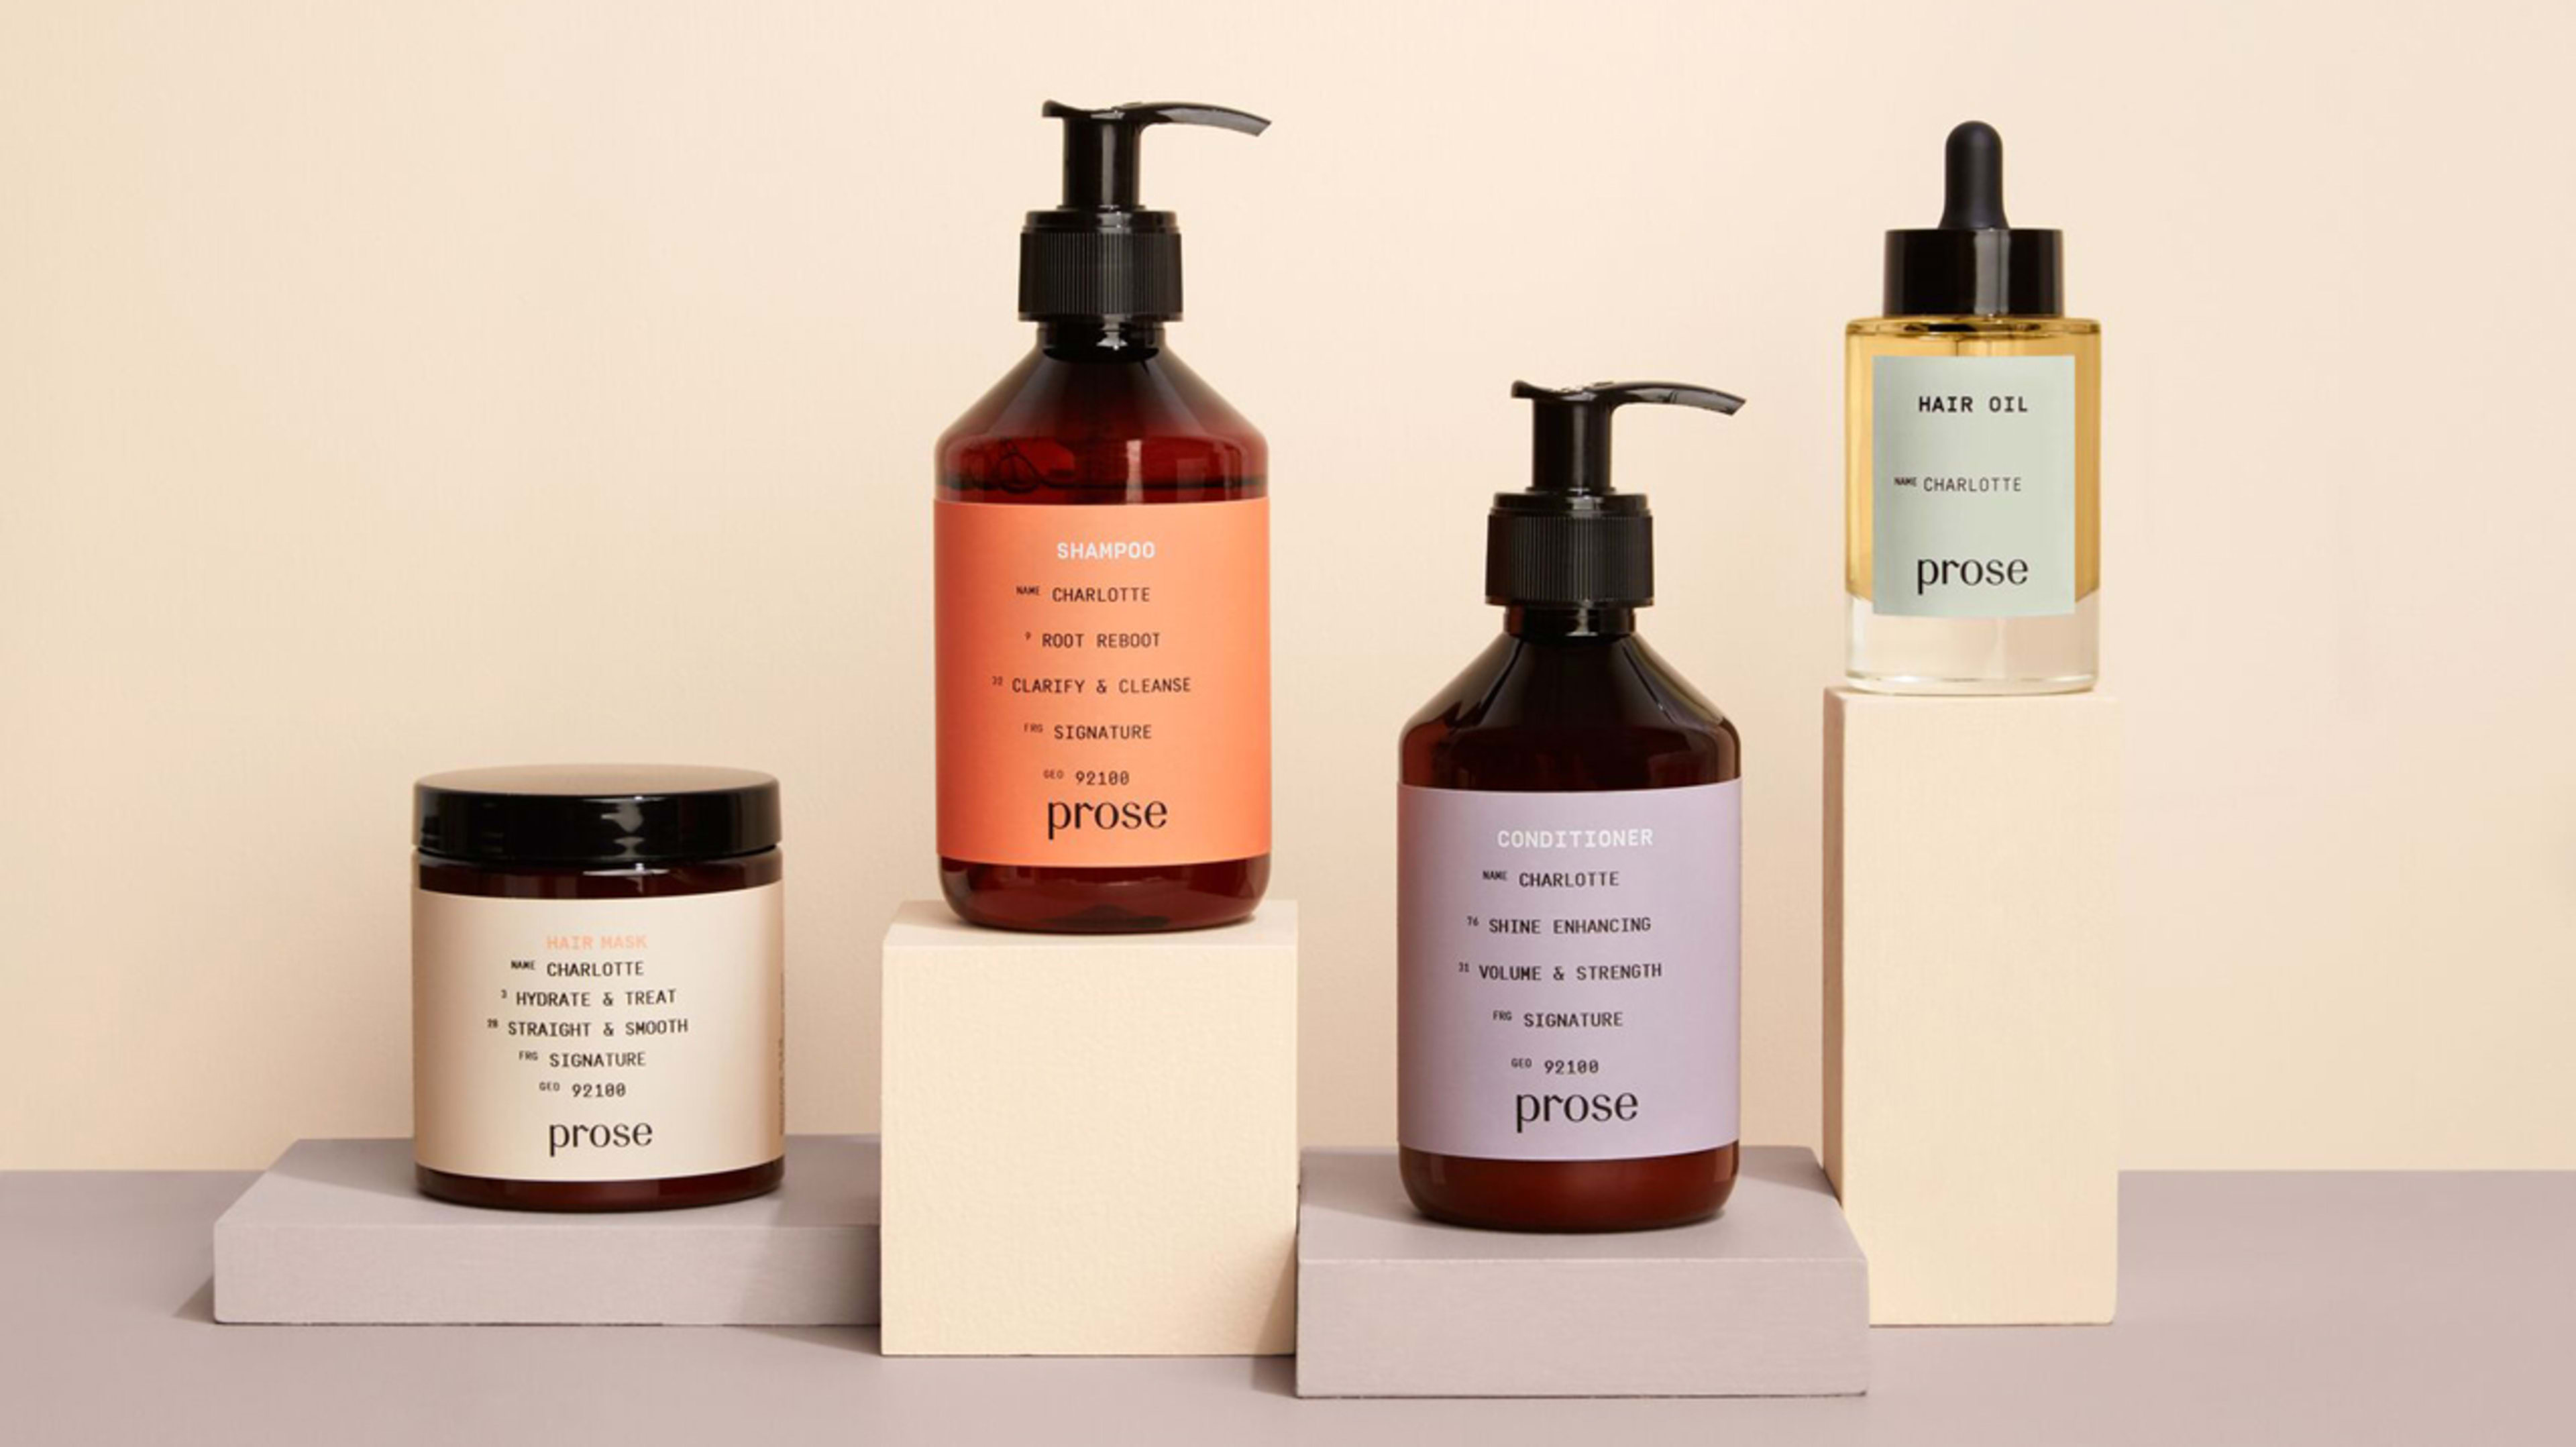 Custom shampoo brand Prose lands a whopping $18M in funding